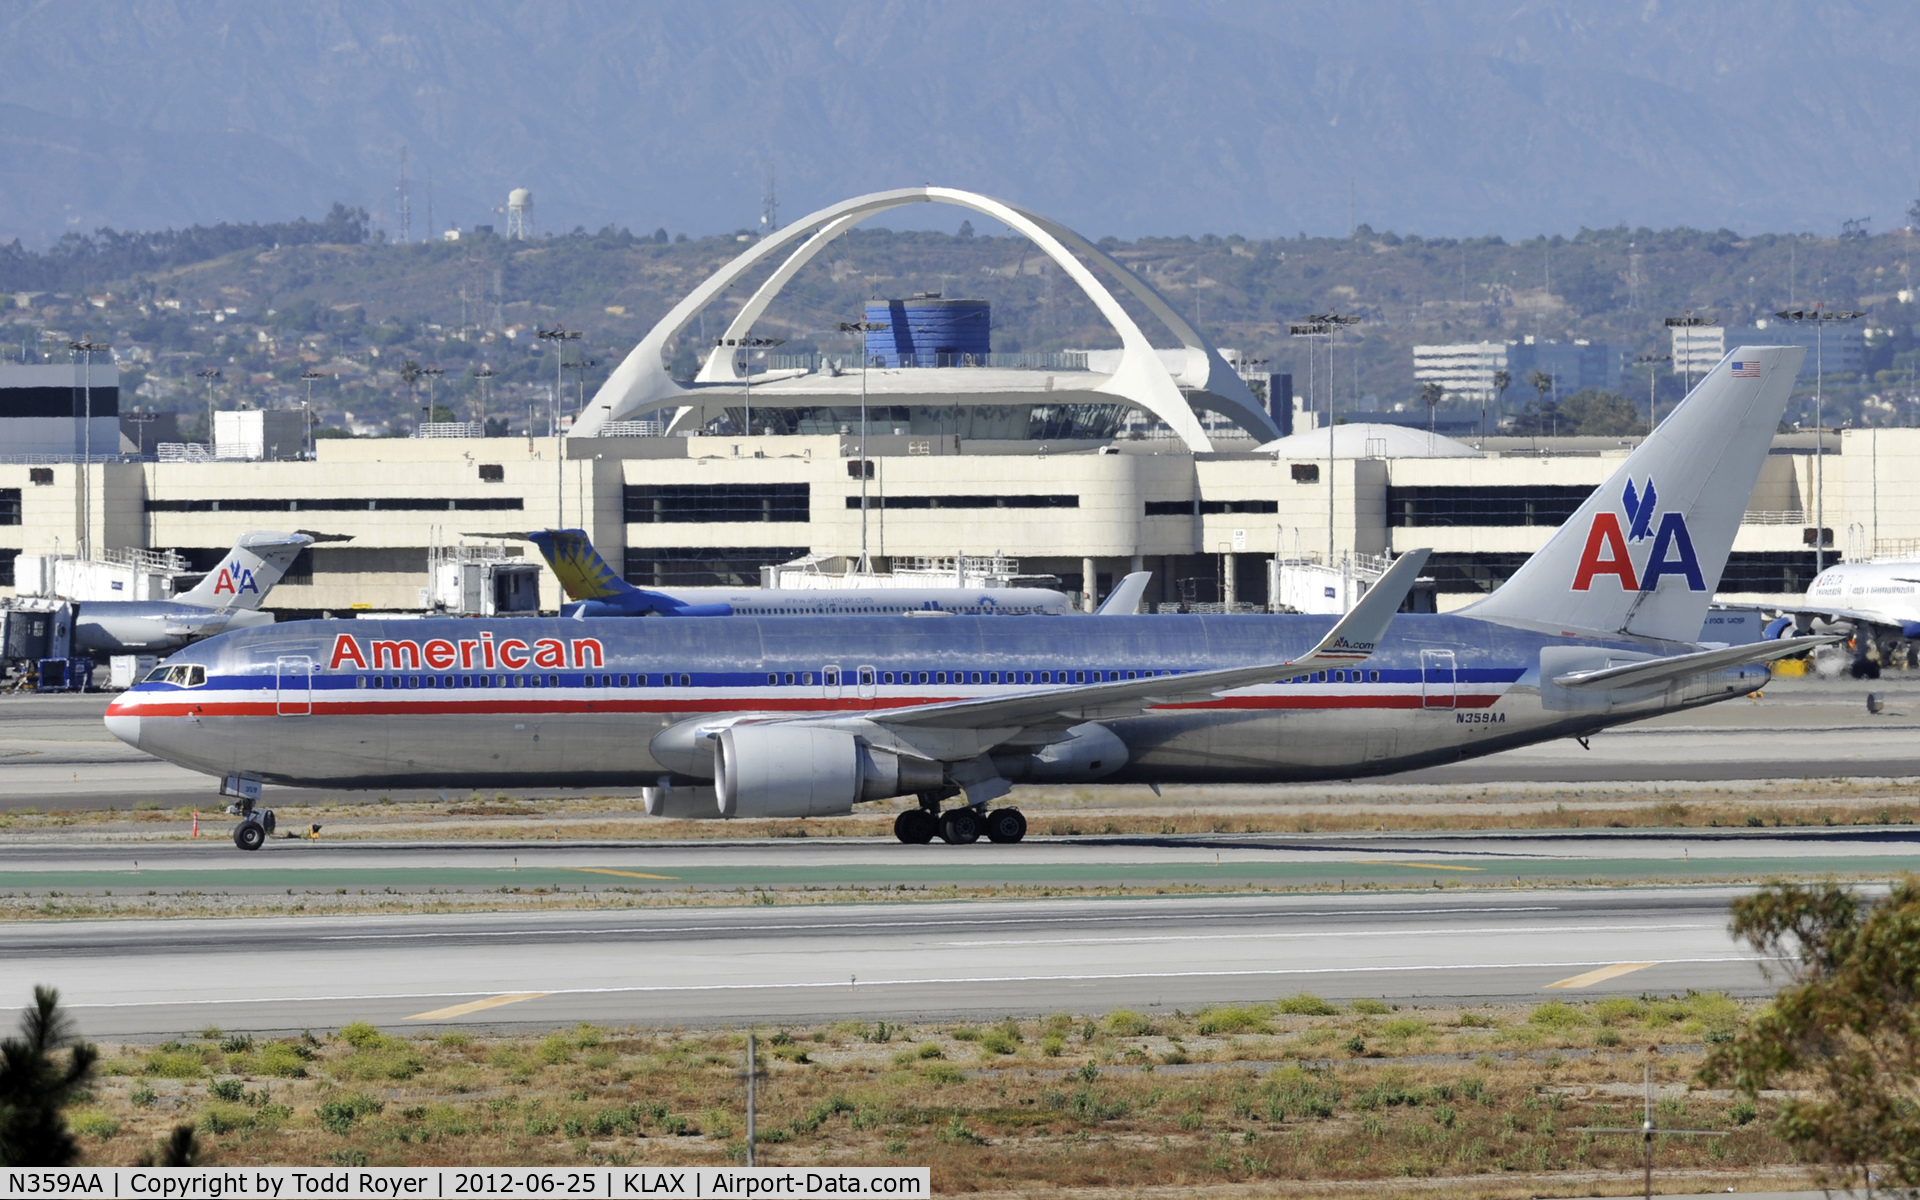 N359AA, 1988 Boeing 767-323 C/N 24040, Taxiing to gate after arriving at LAX on 25L